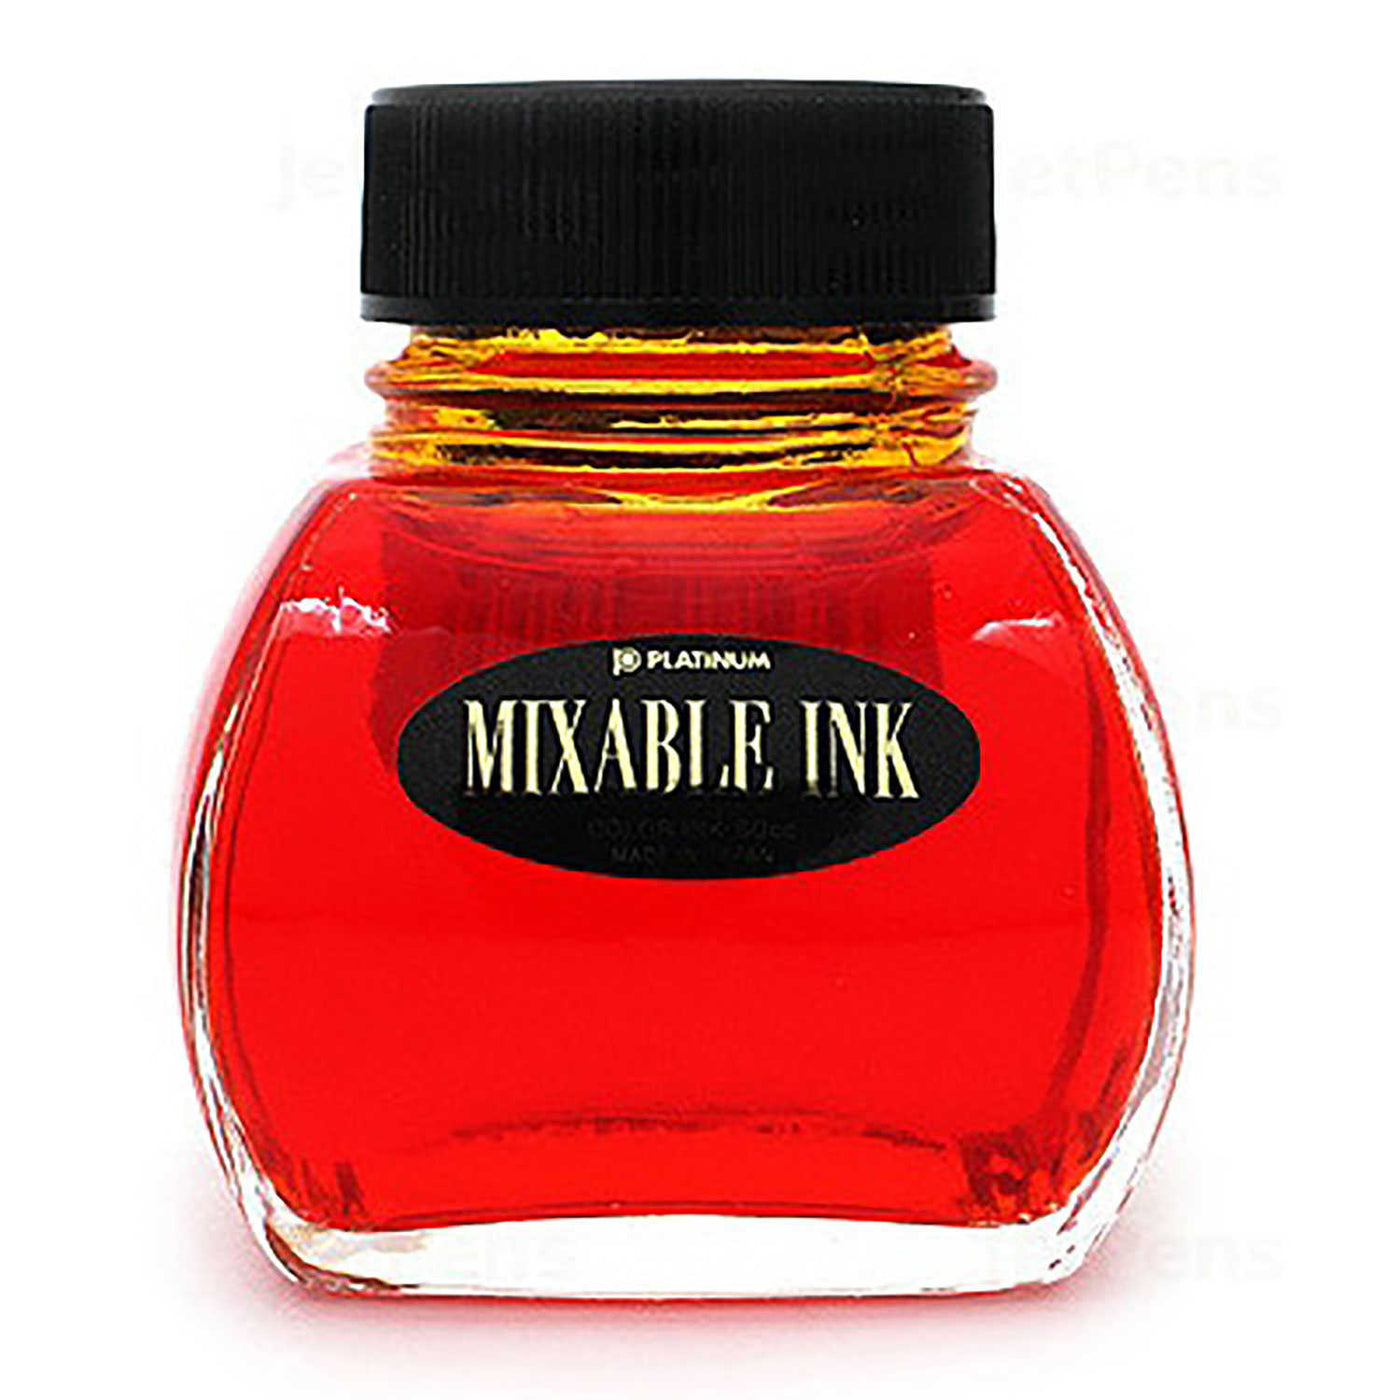 Platinum Mixable Sunny Yellow Ink Bottle Yellow - 60ml